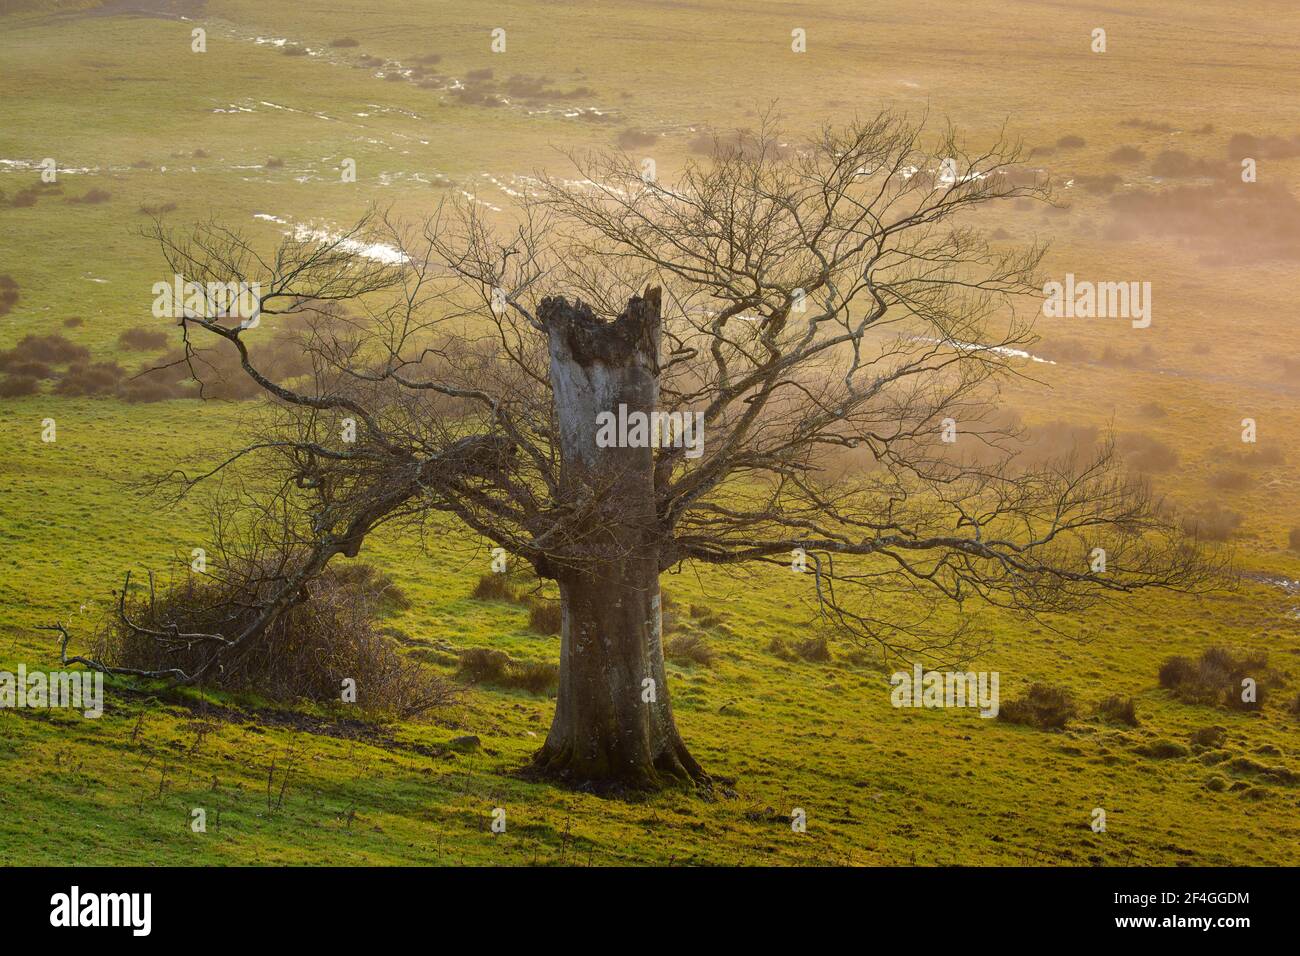 Large tree snaped off by gale force winds Stock Photo